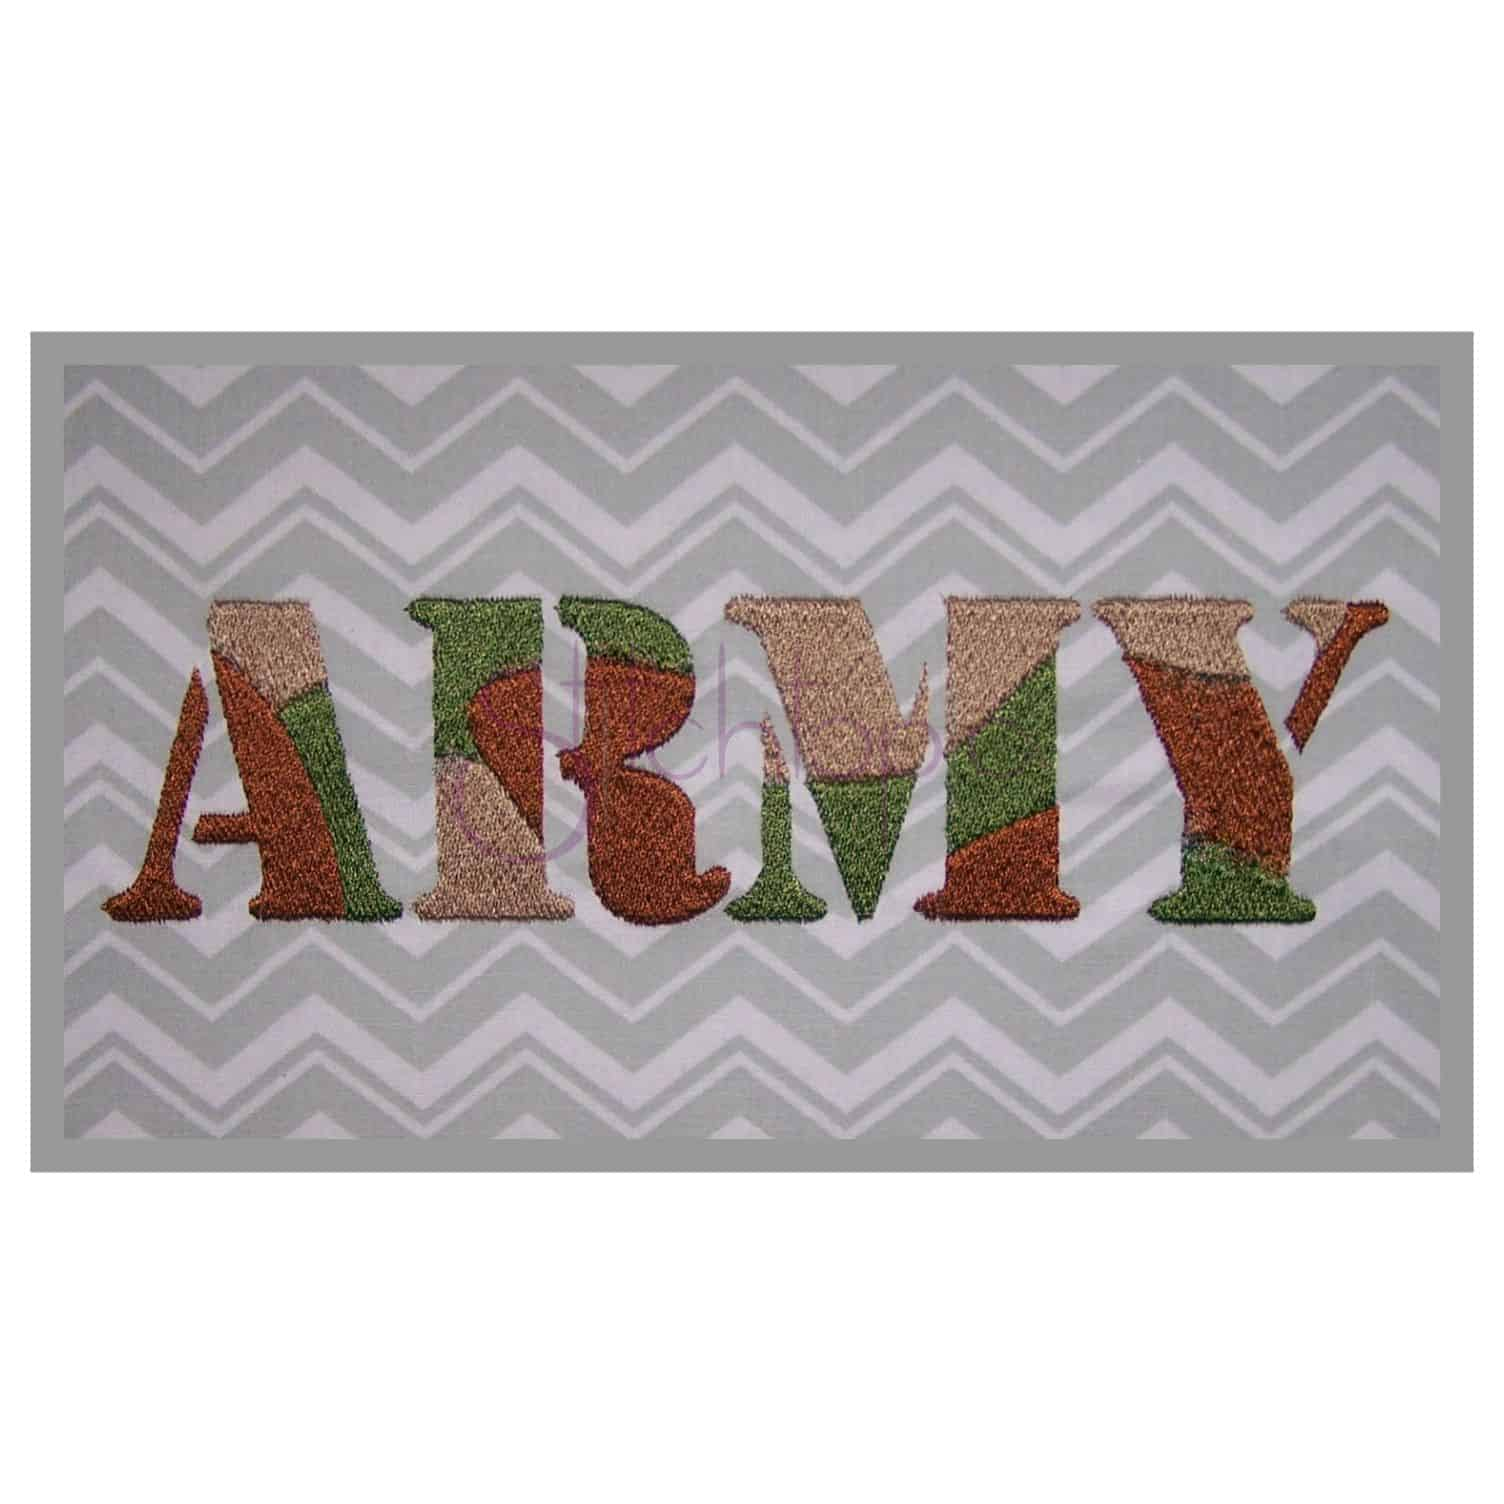 Embroidery Alphabet Pattern Army Camouflage Embroidery Alphabet Set 15 2 25 3